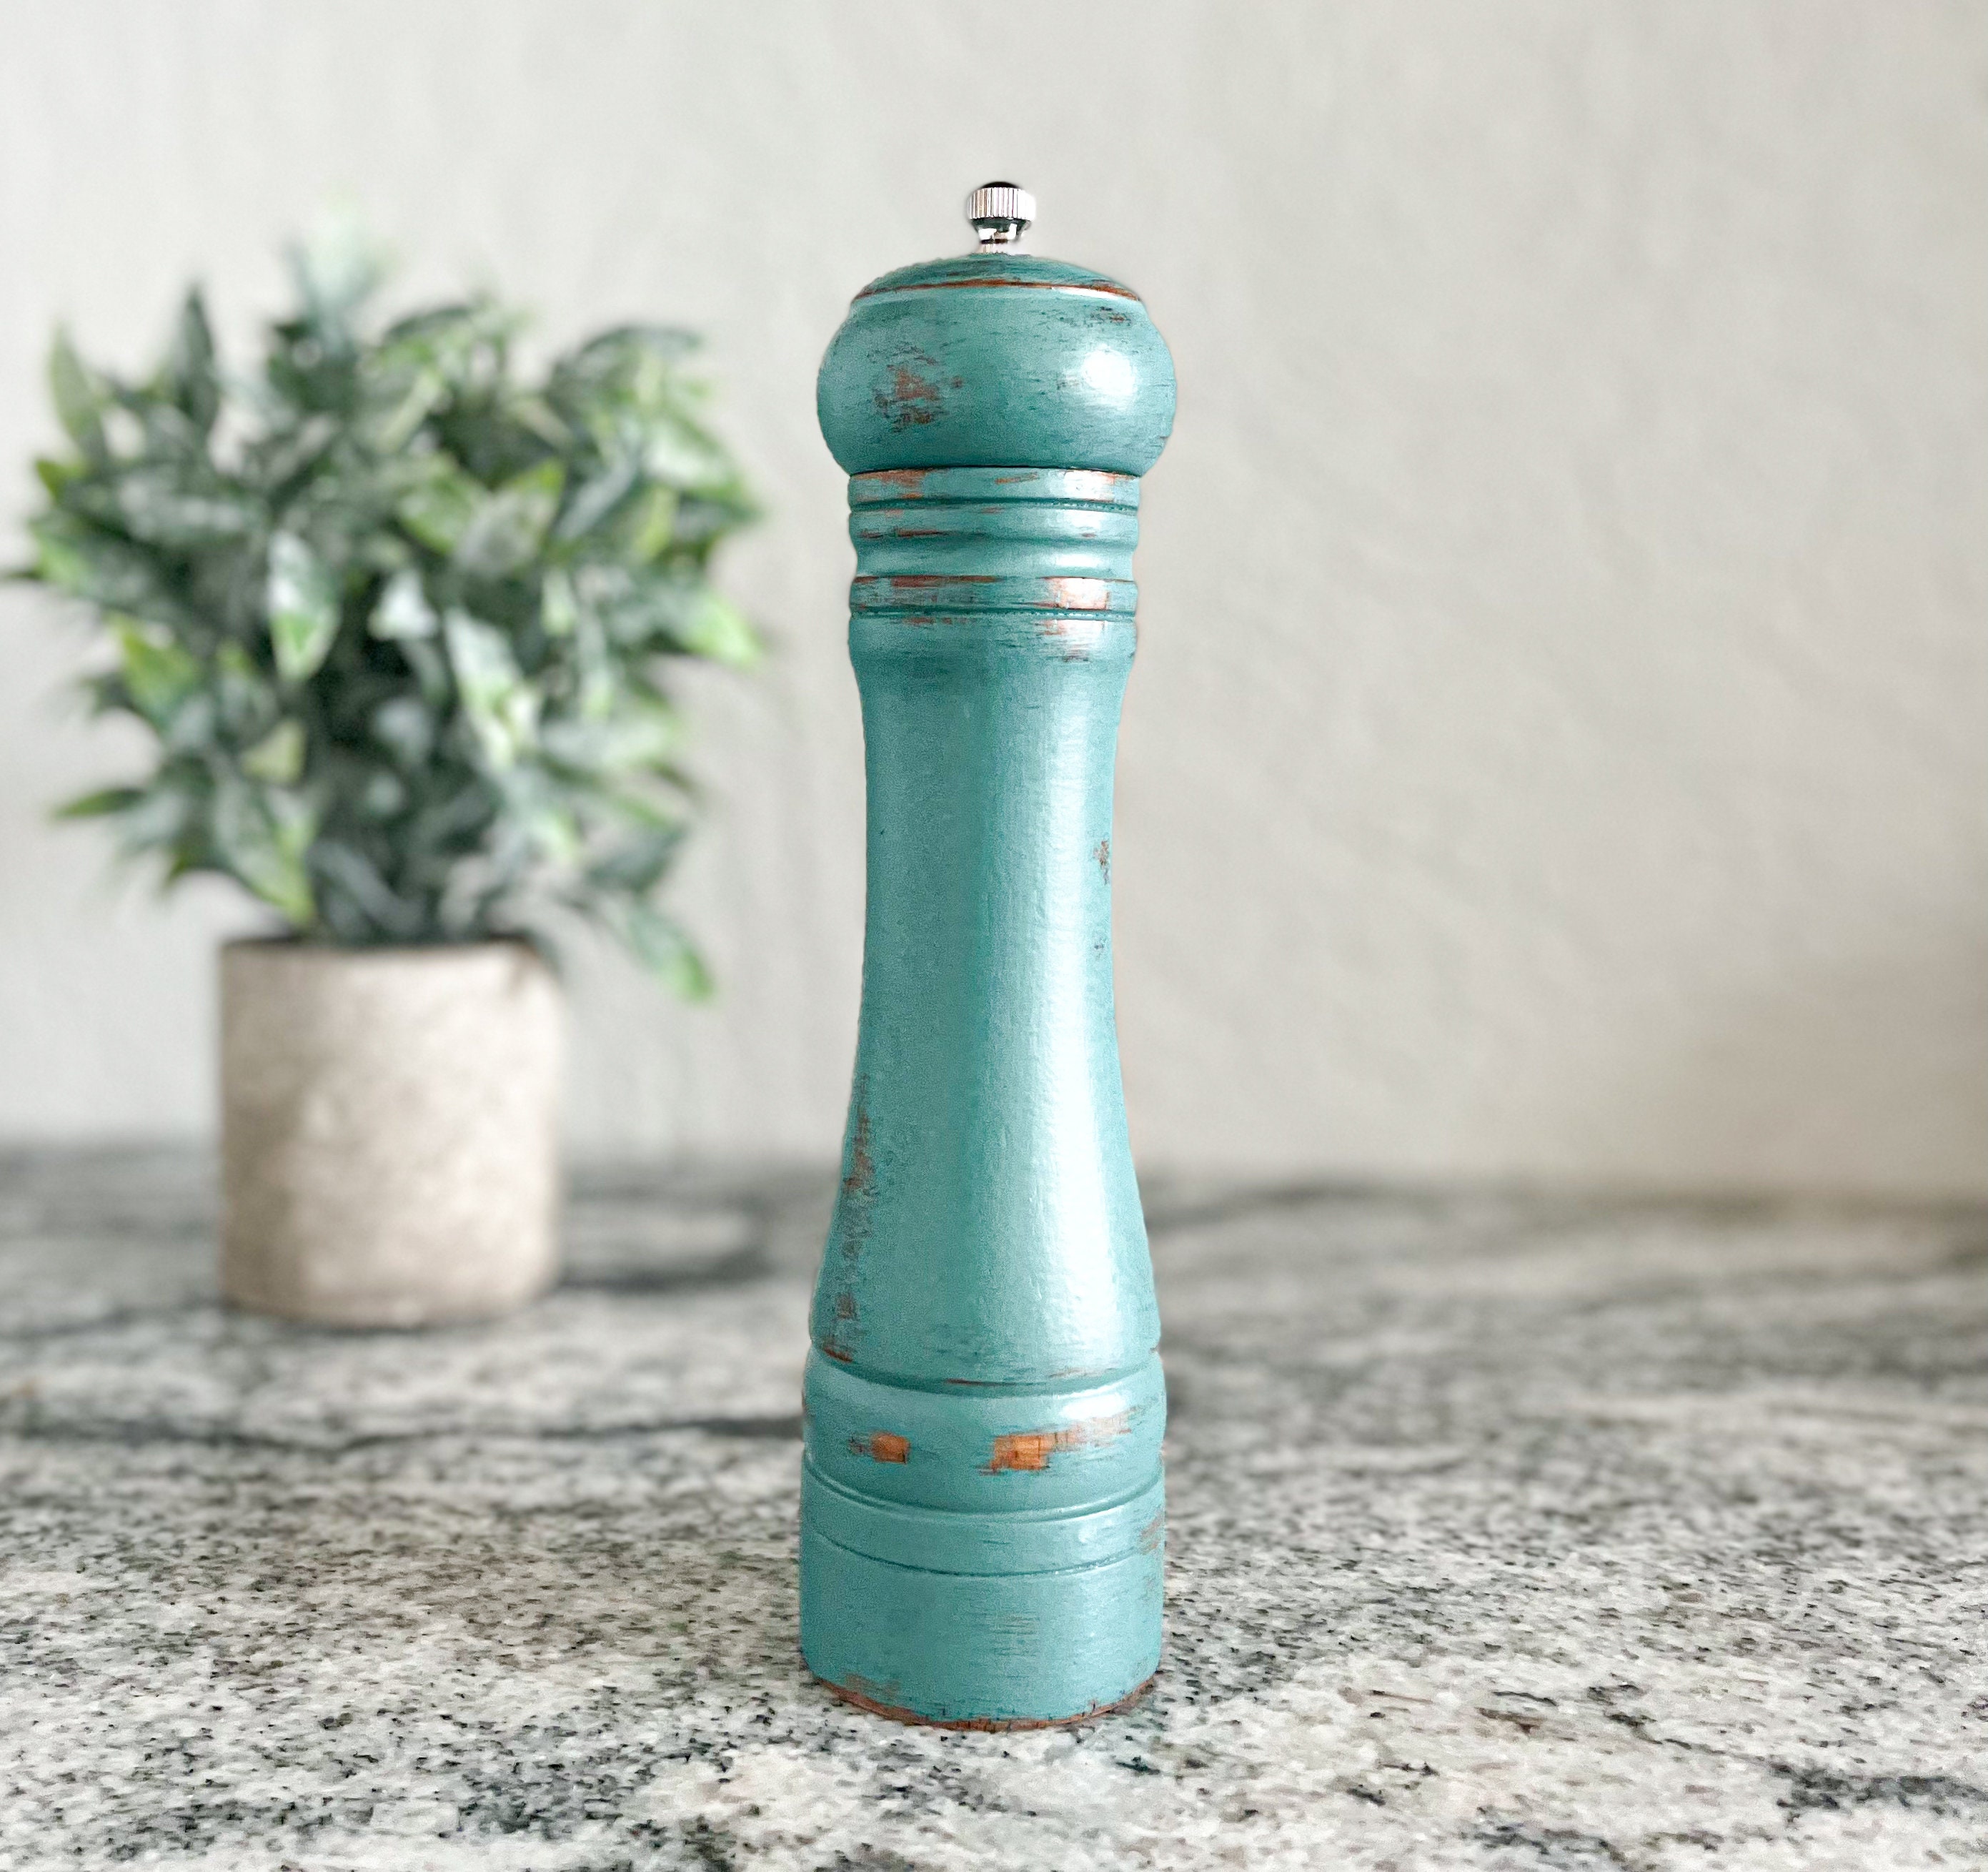 8 Inch Tall Farmhouse Rustic Teal Pepper Grinder, Vintage Style